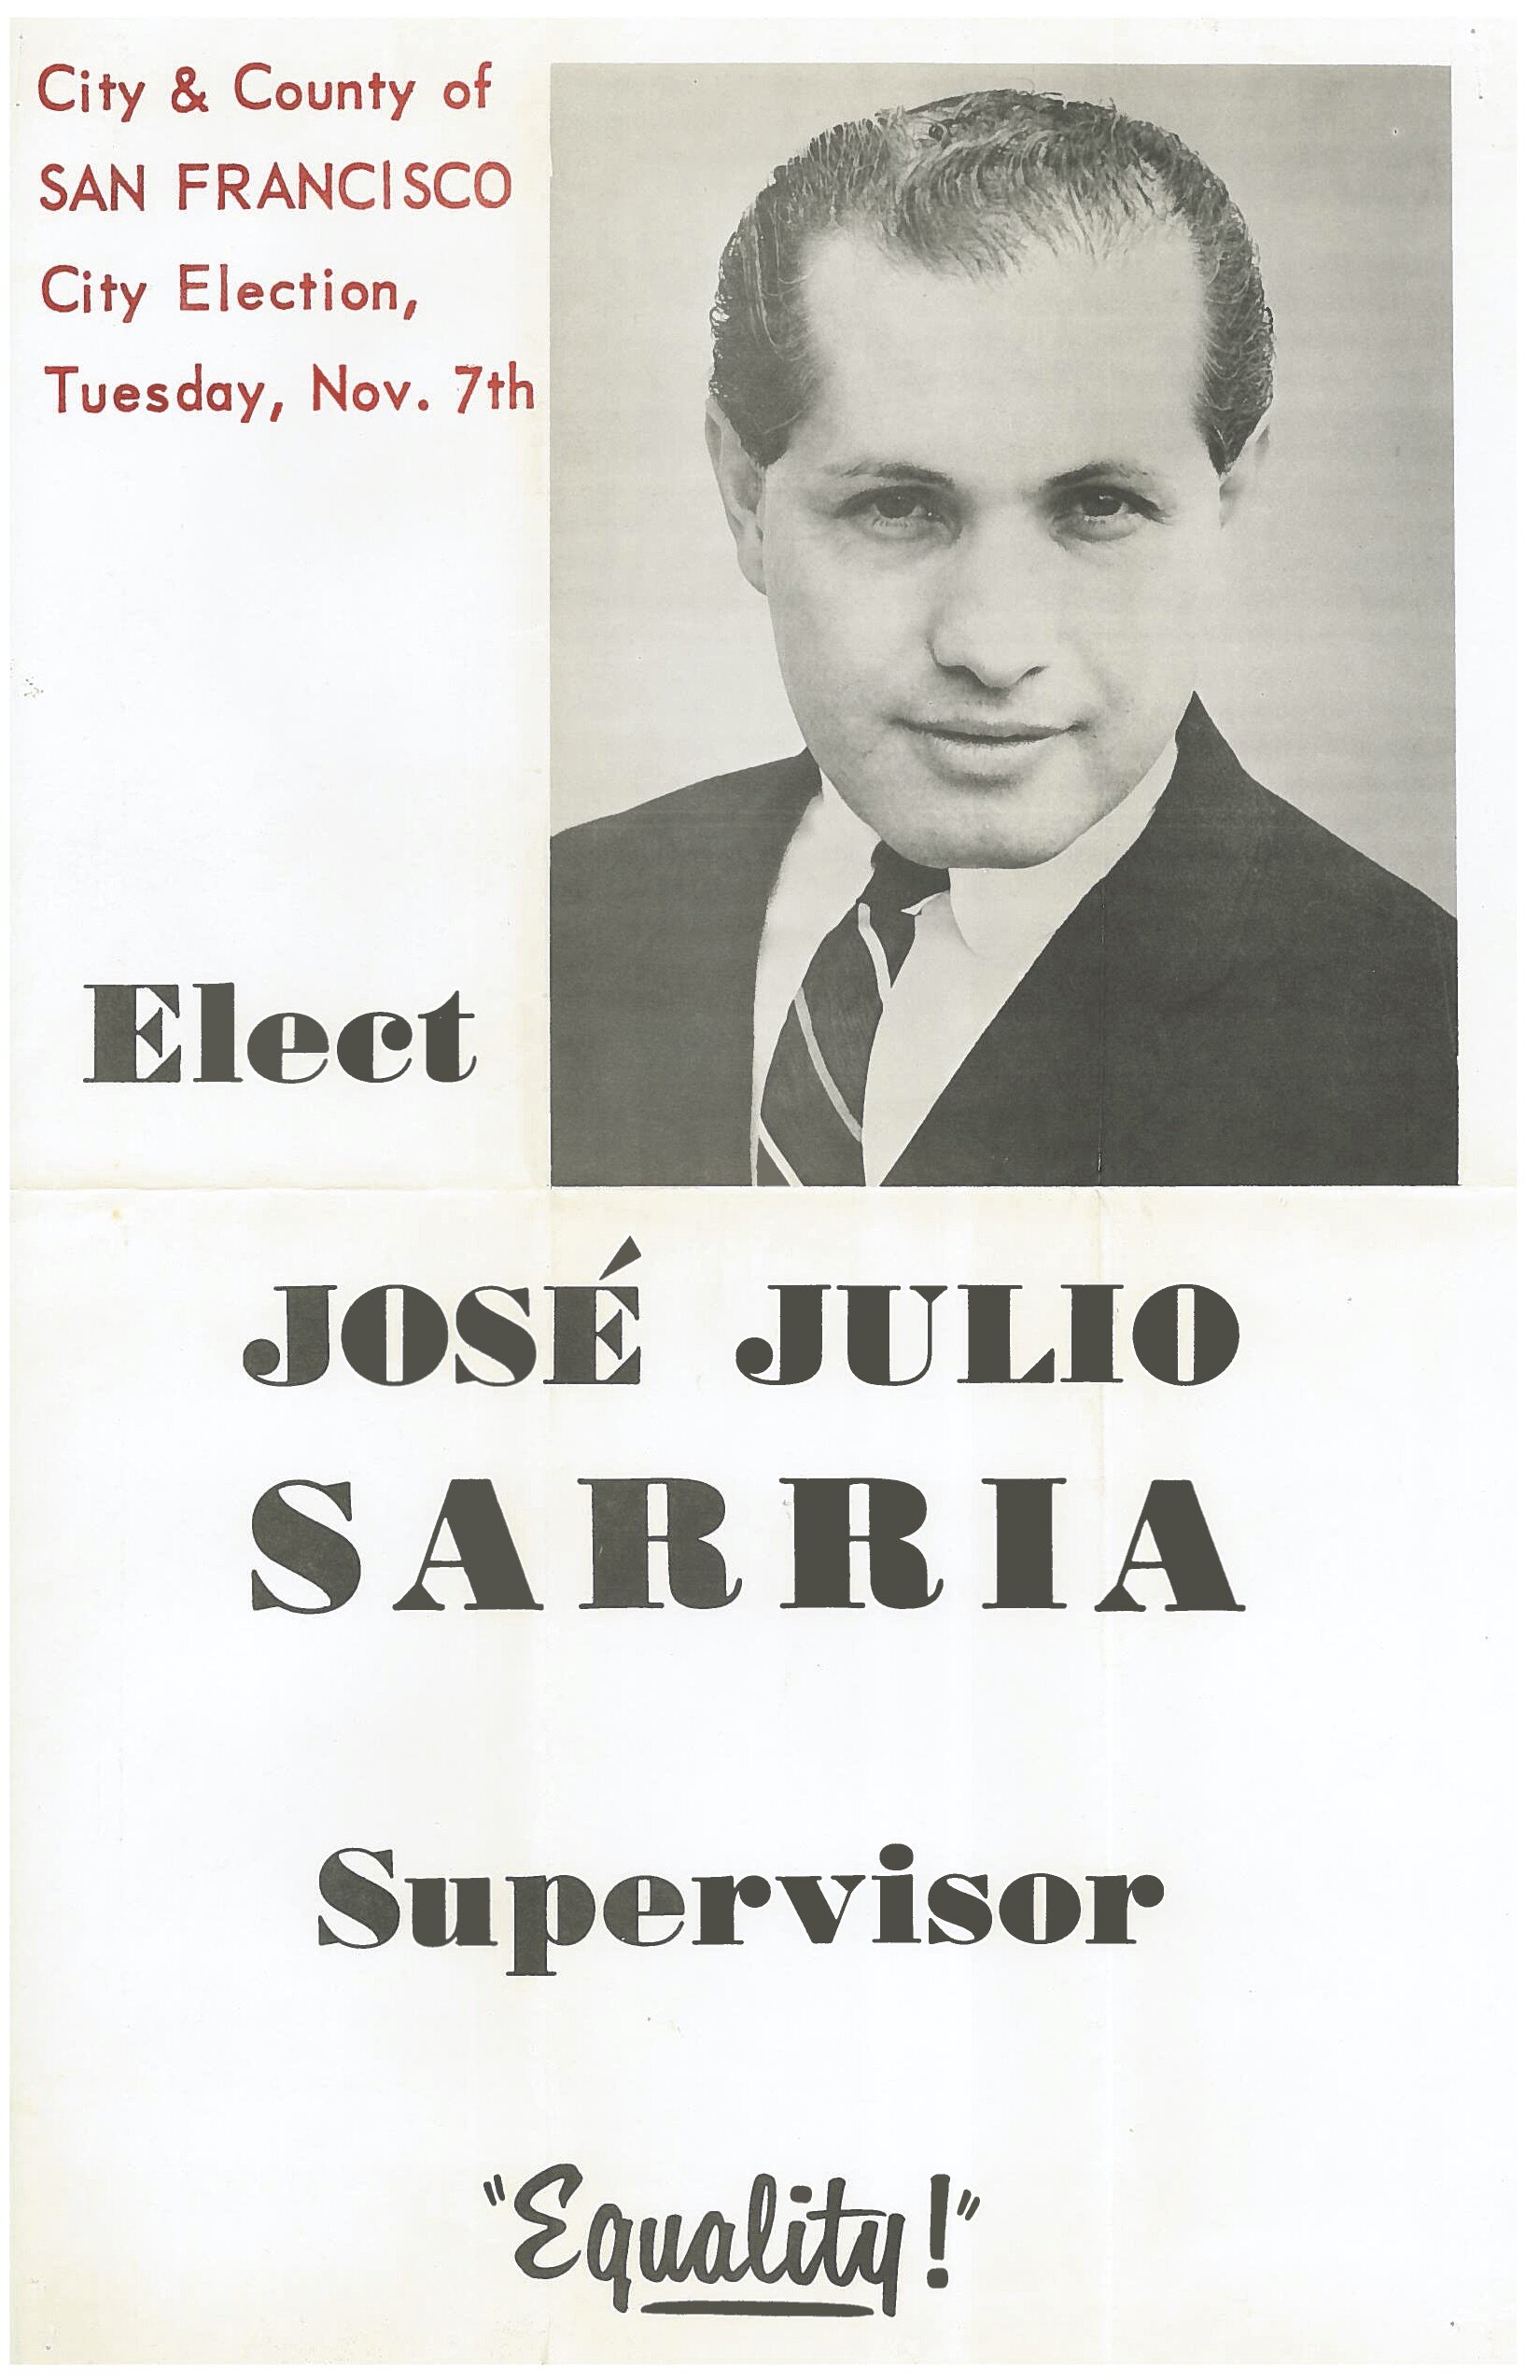 Board of Supervisors poster, 1961